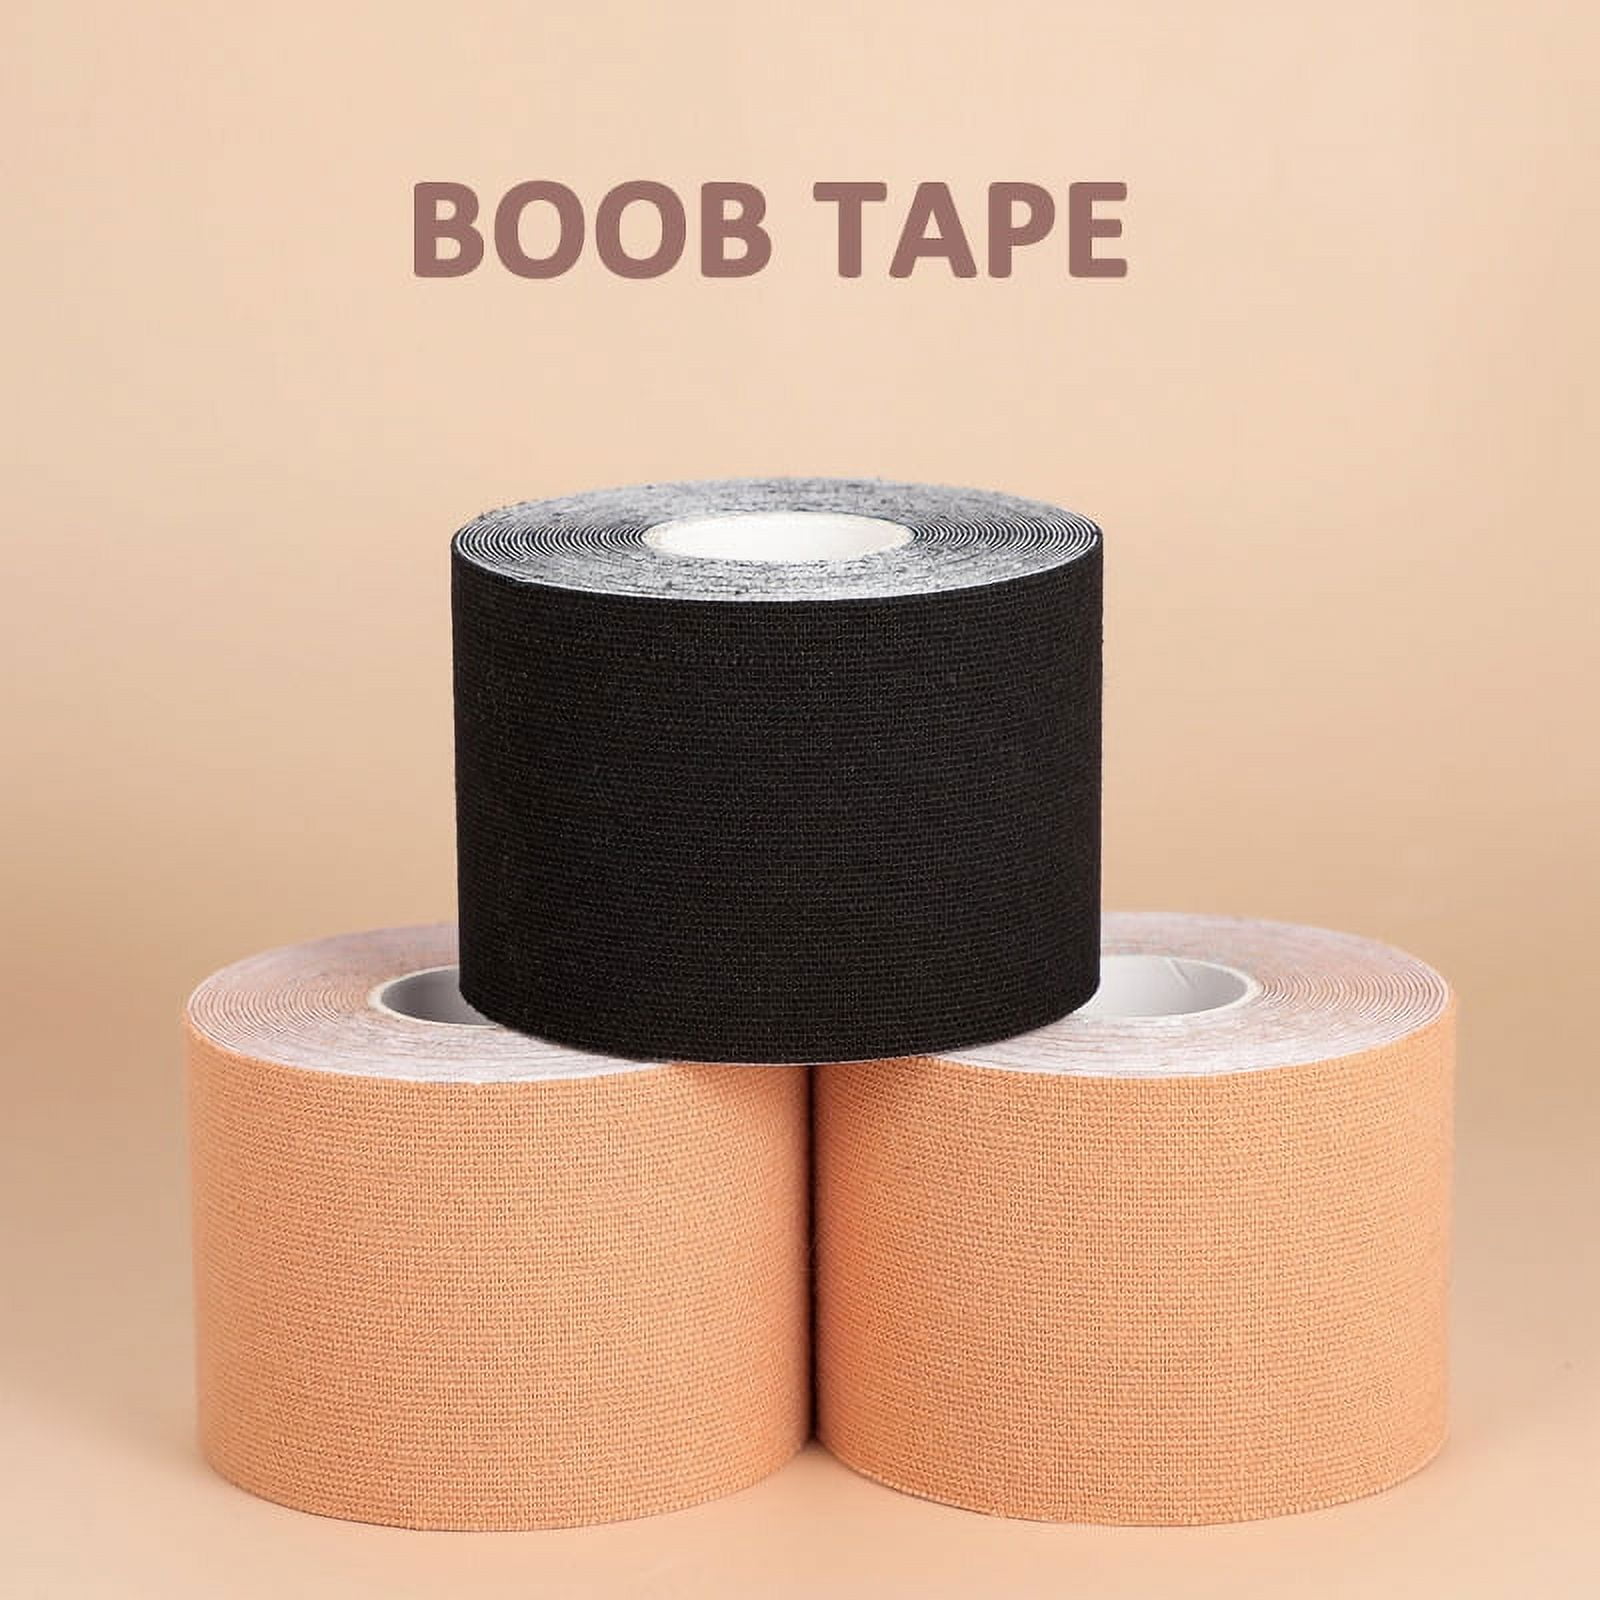 Buy VANILLAFUDGE Boob Tape Boobytape for Breast Lift  Achieve Chest Brace  Lift & Contour of Breasts Sticky Body Tape for Push up & Shape in All  Clothing Fabric Dress Types .